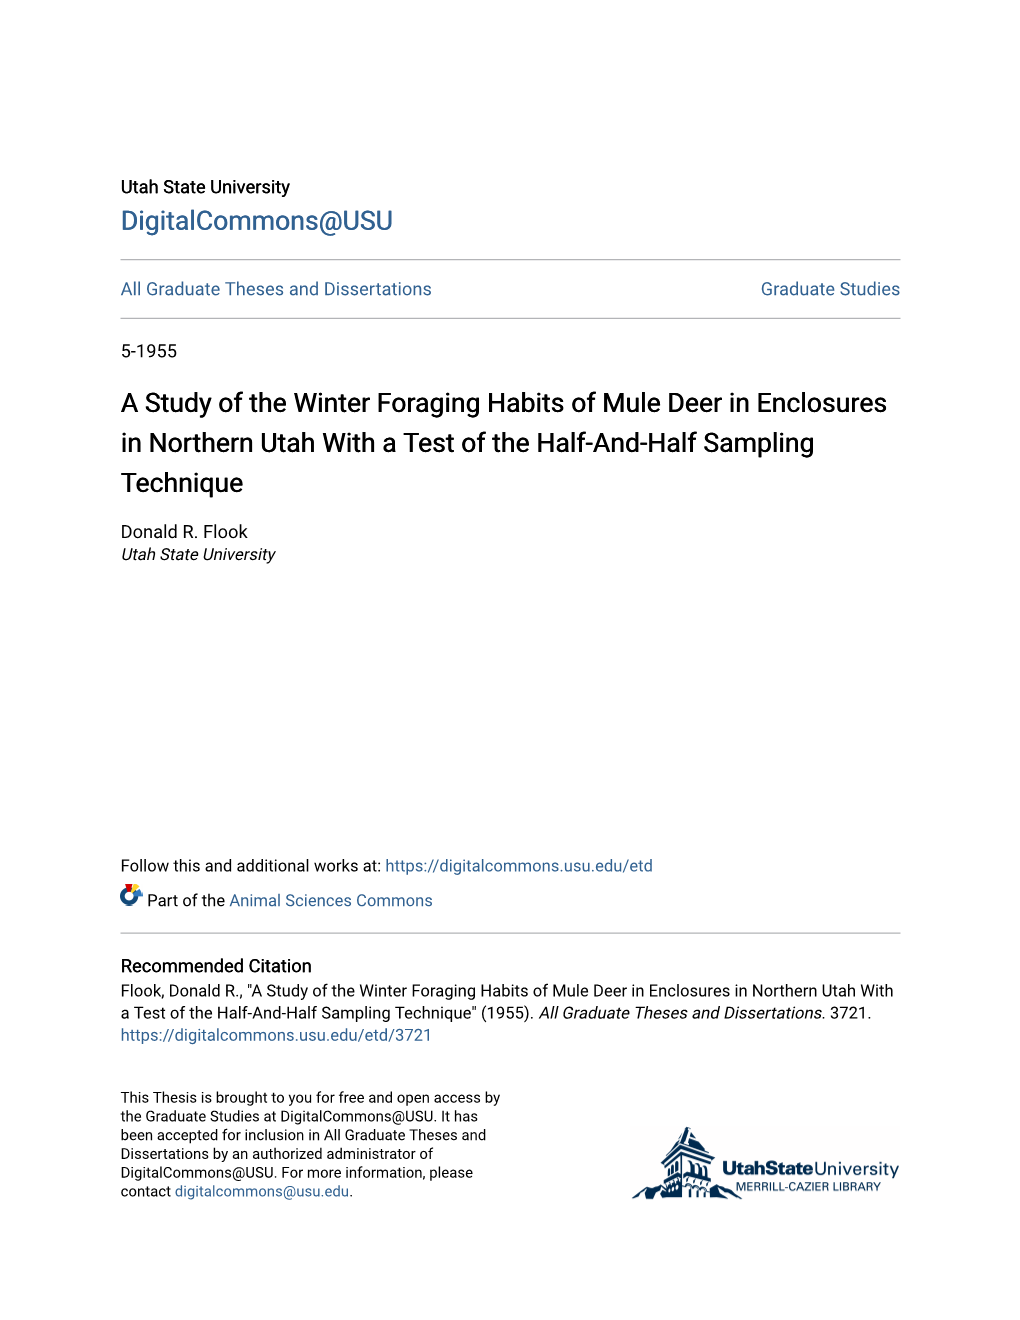 A Study of the Winter Foraging Habits of Mule Deer in Enclosures in Northern Utah with a Test of the Half-And-Half Sampling Technique